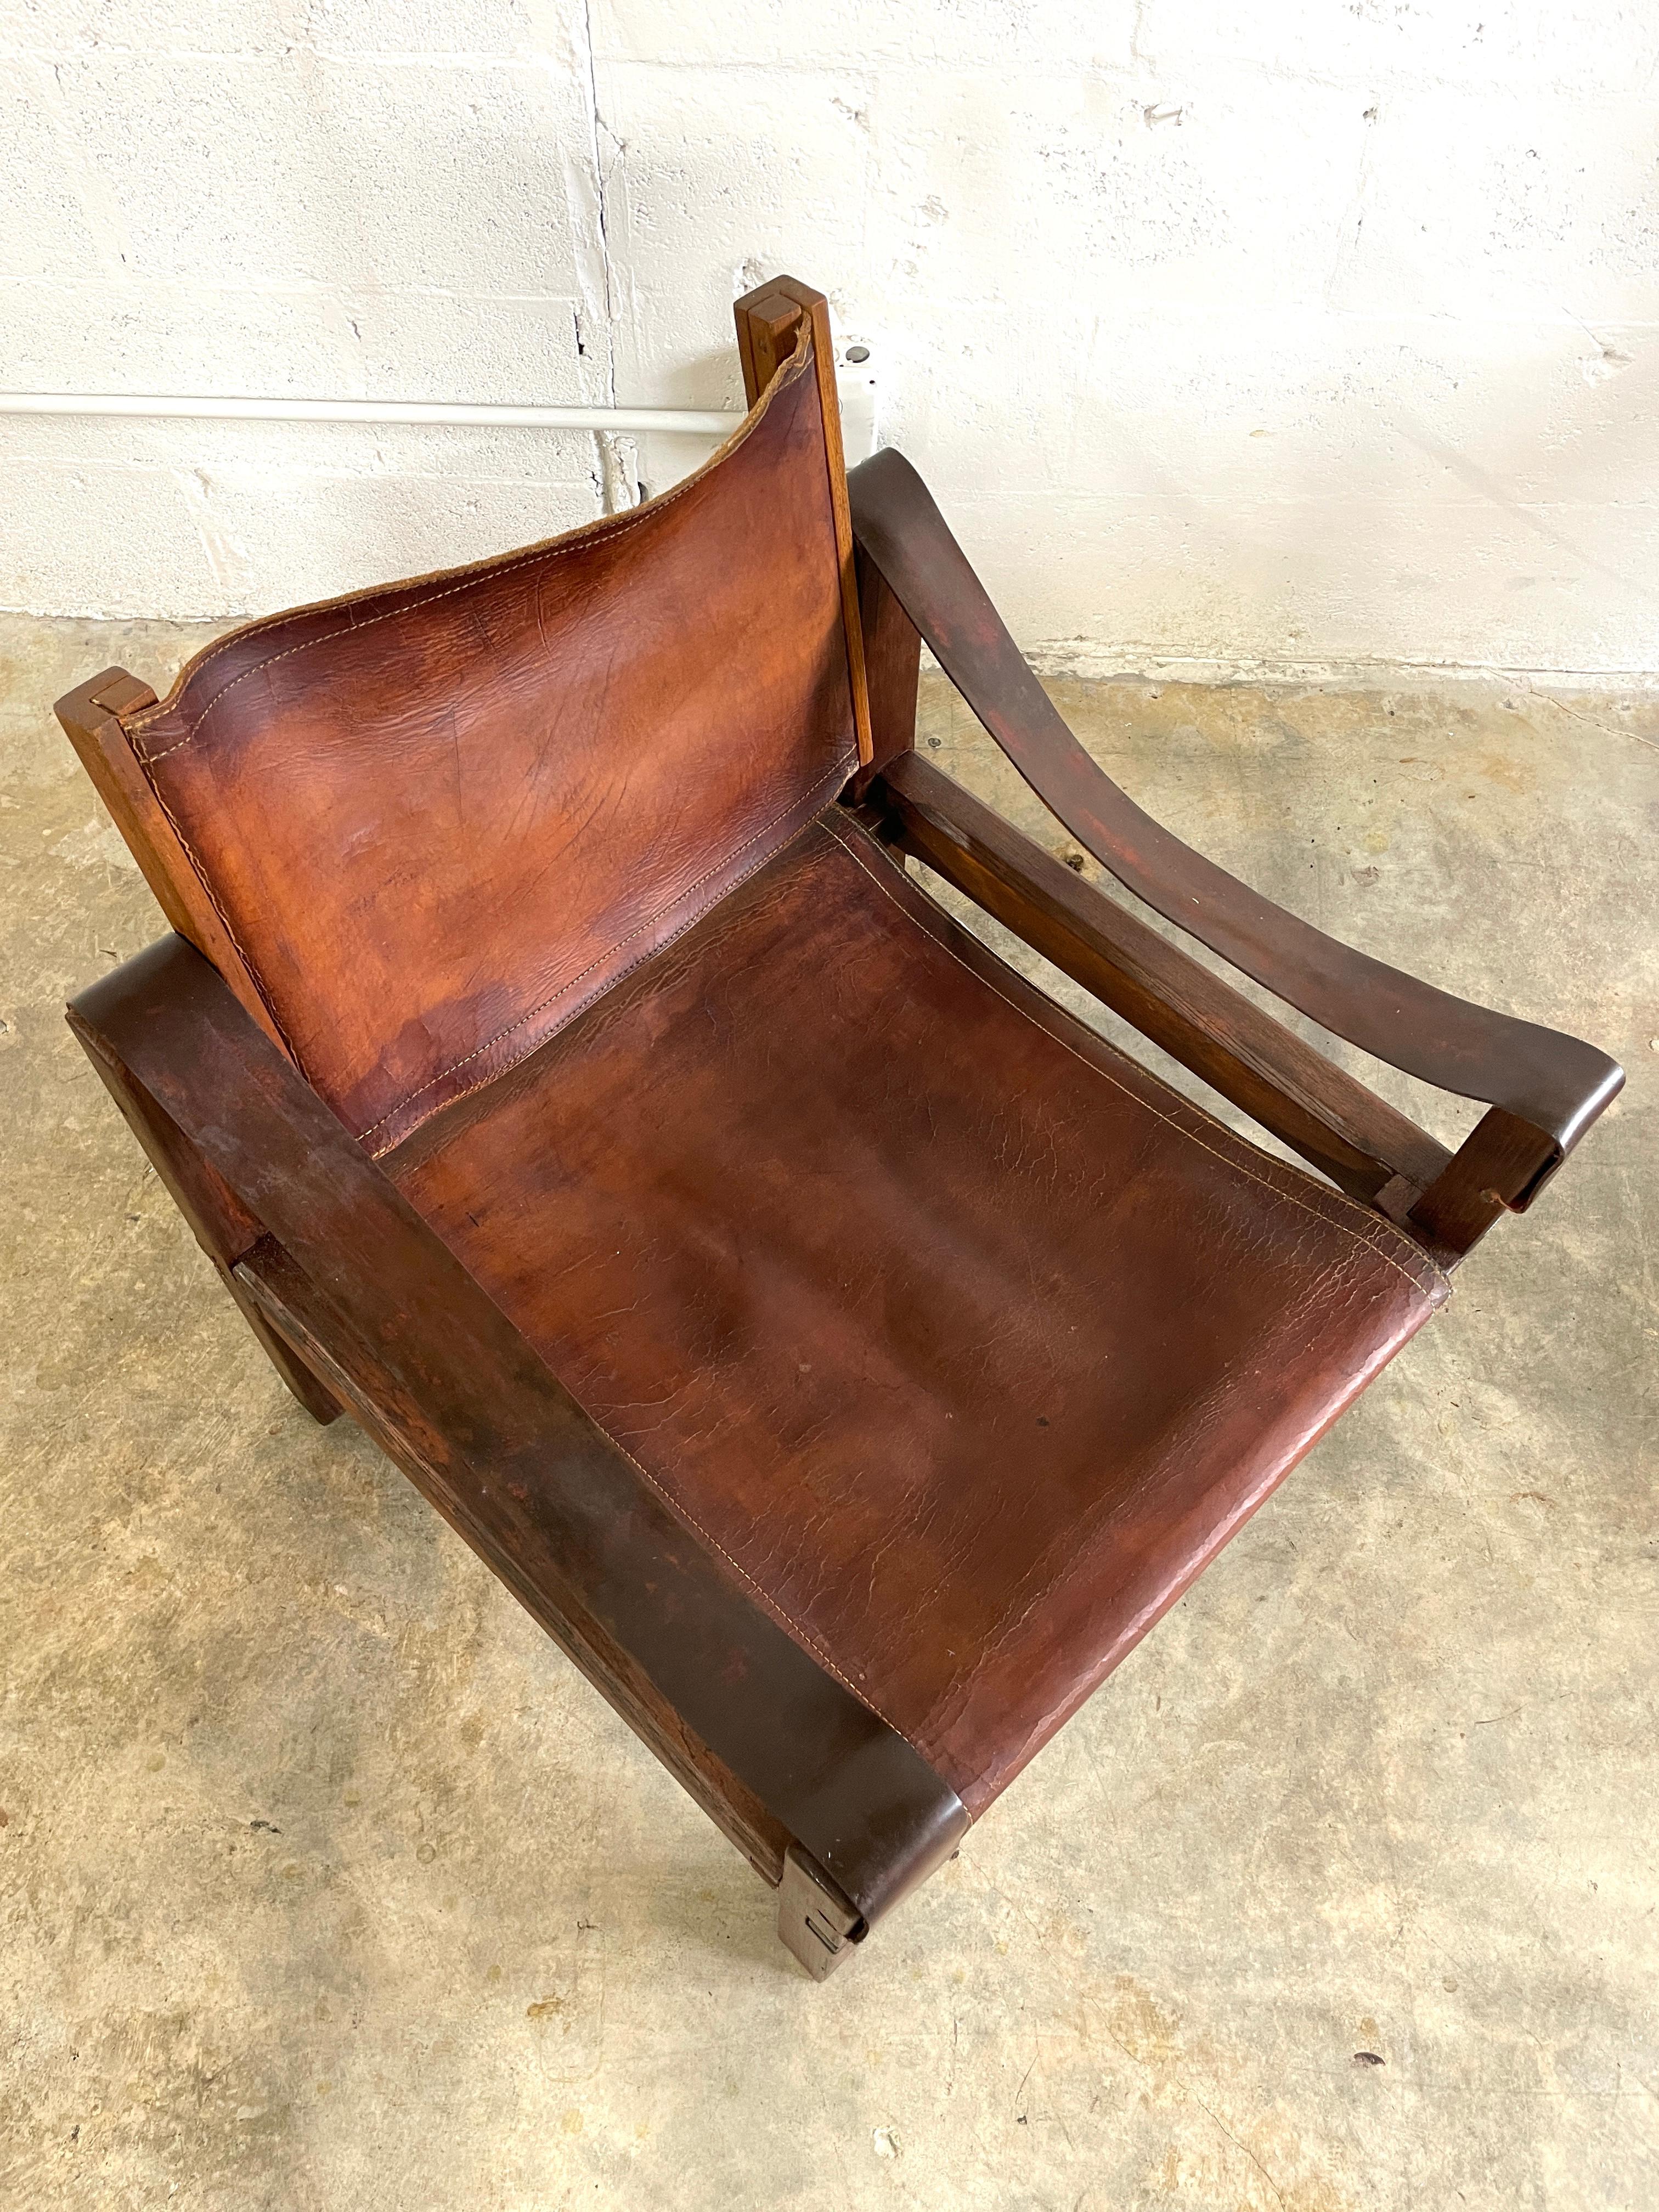 Iconic Pierre Chapo S10 Chair. France 1960s. Original saddle leather and sold elm wood. This model became one of the leading designs at his gallery.